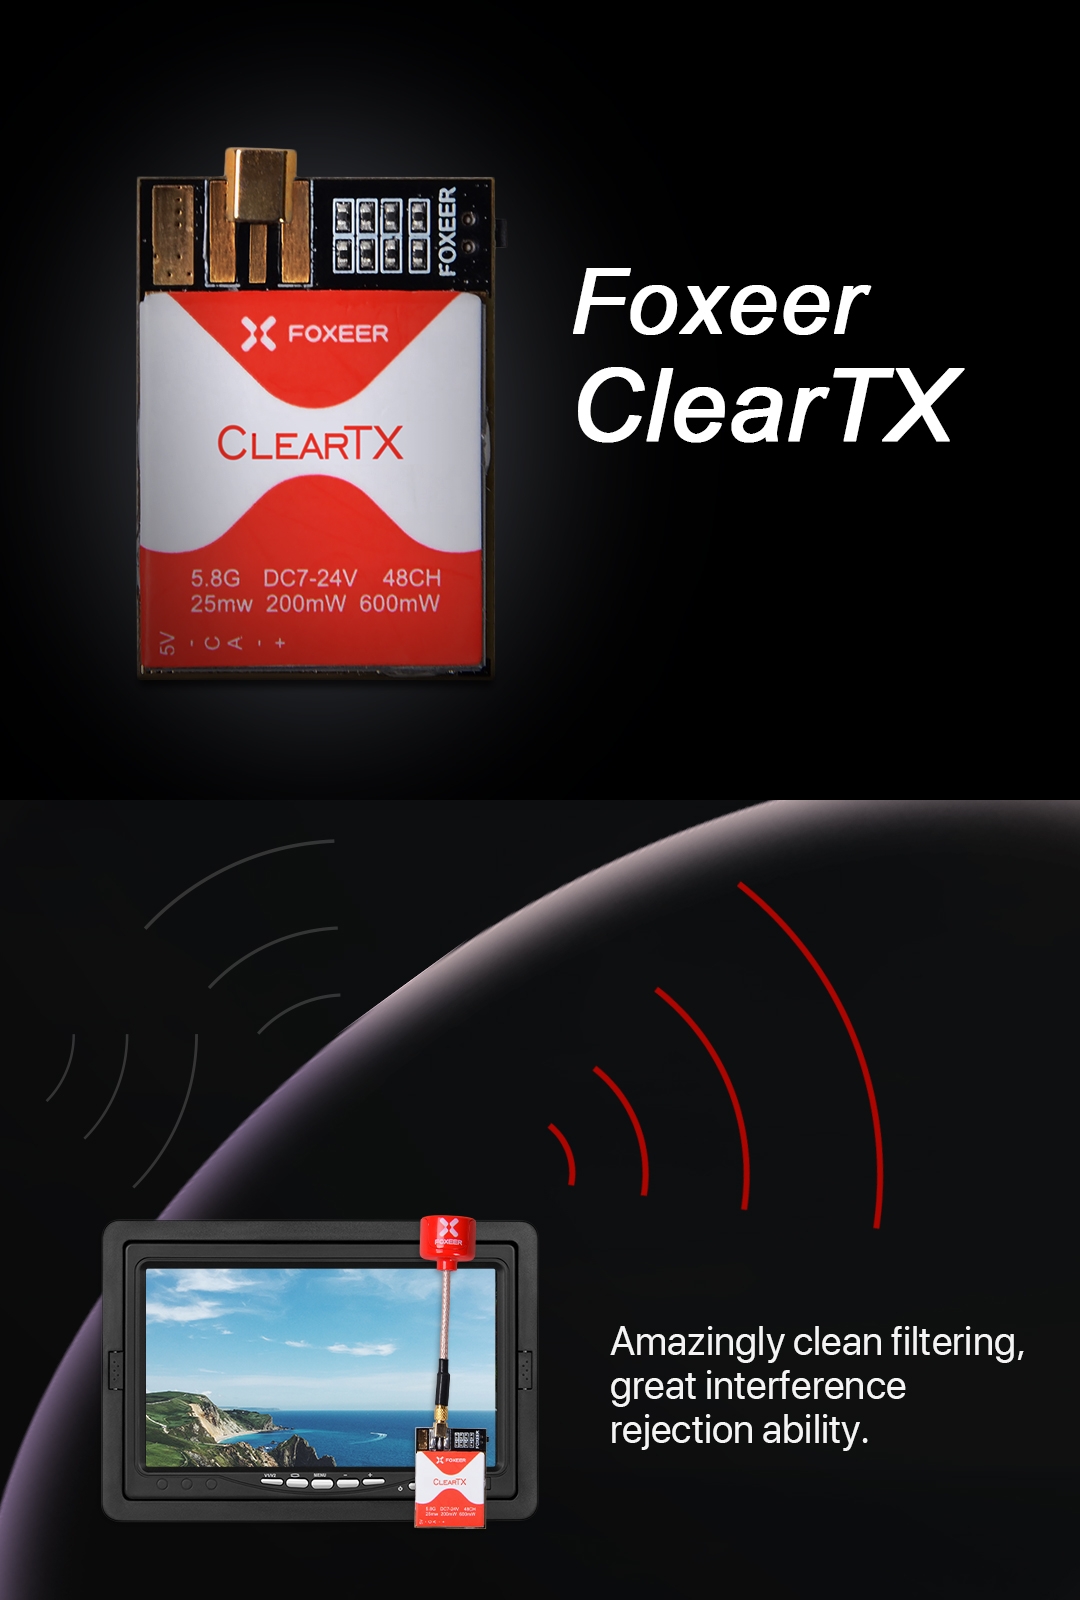 Foxeer ClearTX 5.8G 48CH 25/200/600mW Adjustable Power Video FPV Transmitter w/ Race Band & Pit Mode